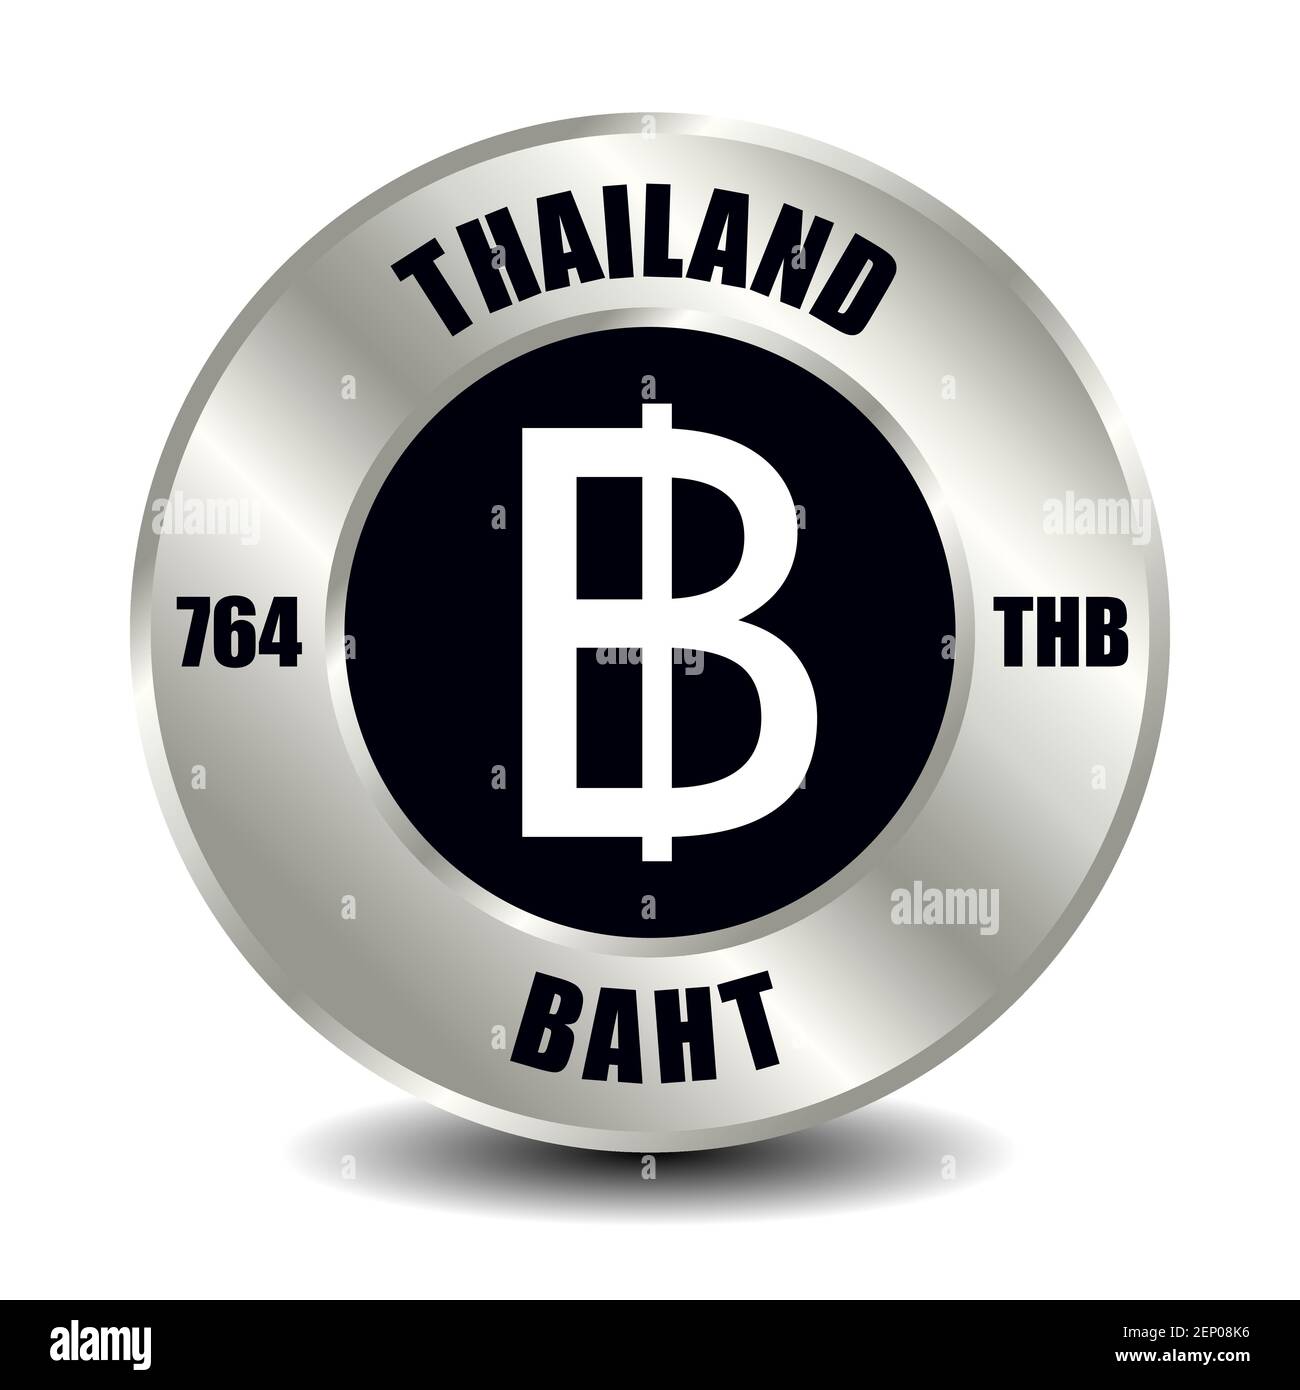 Thailand money icon isolated on round silver coin. Vector sign of currency symbol with international ISO code and abbreviation Stock Vector